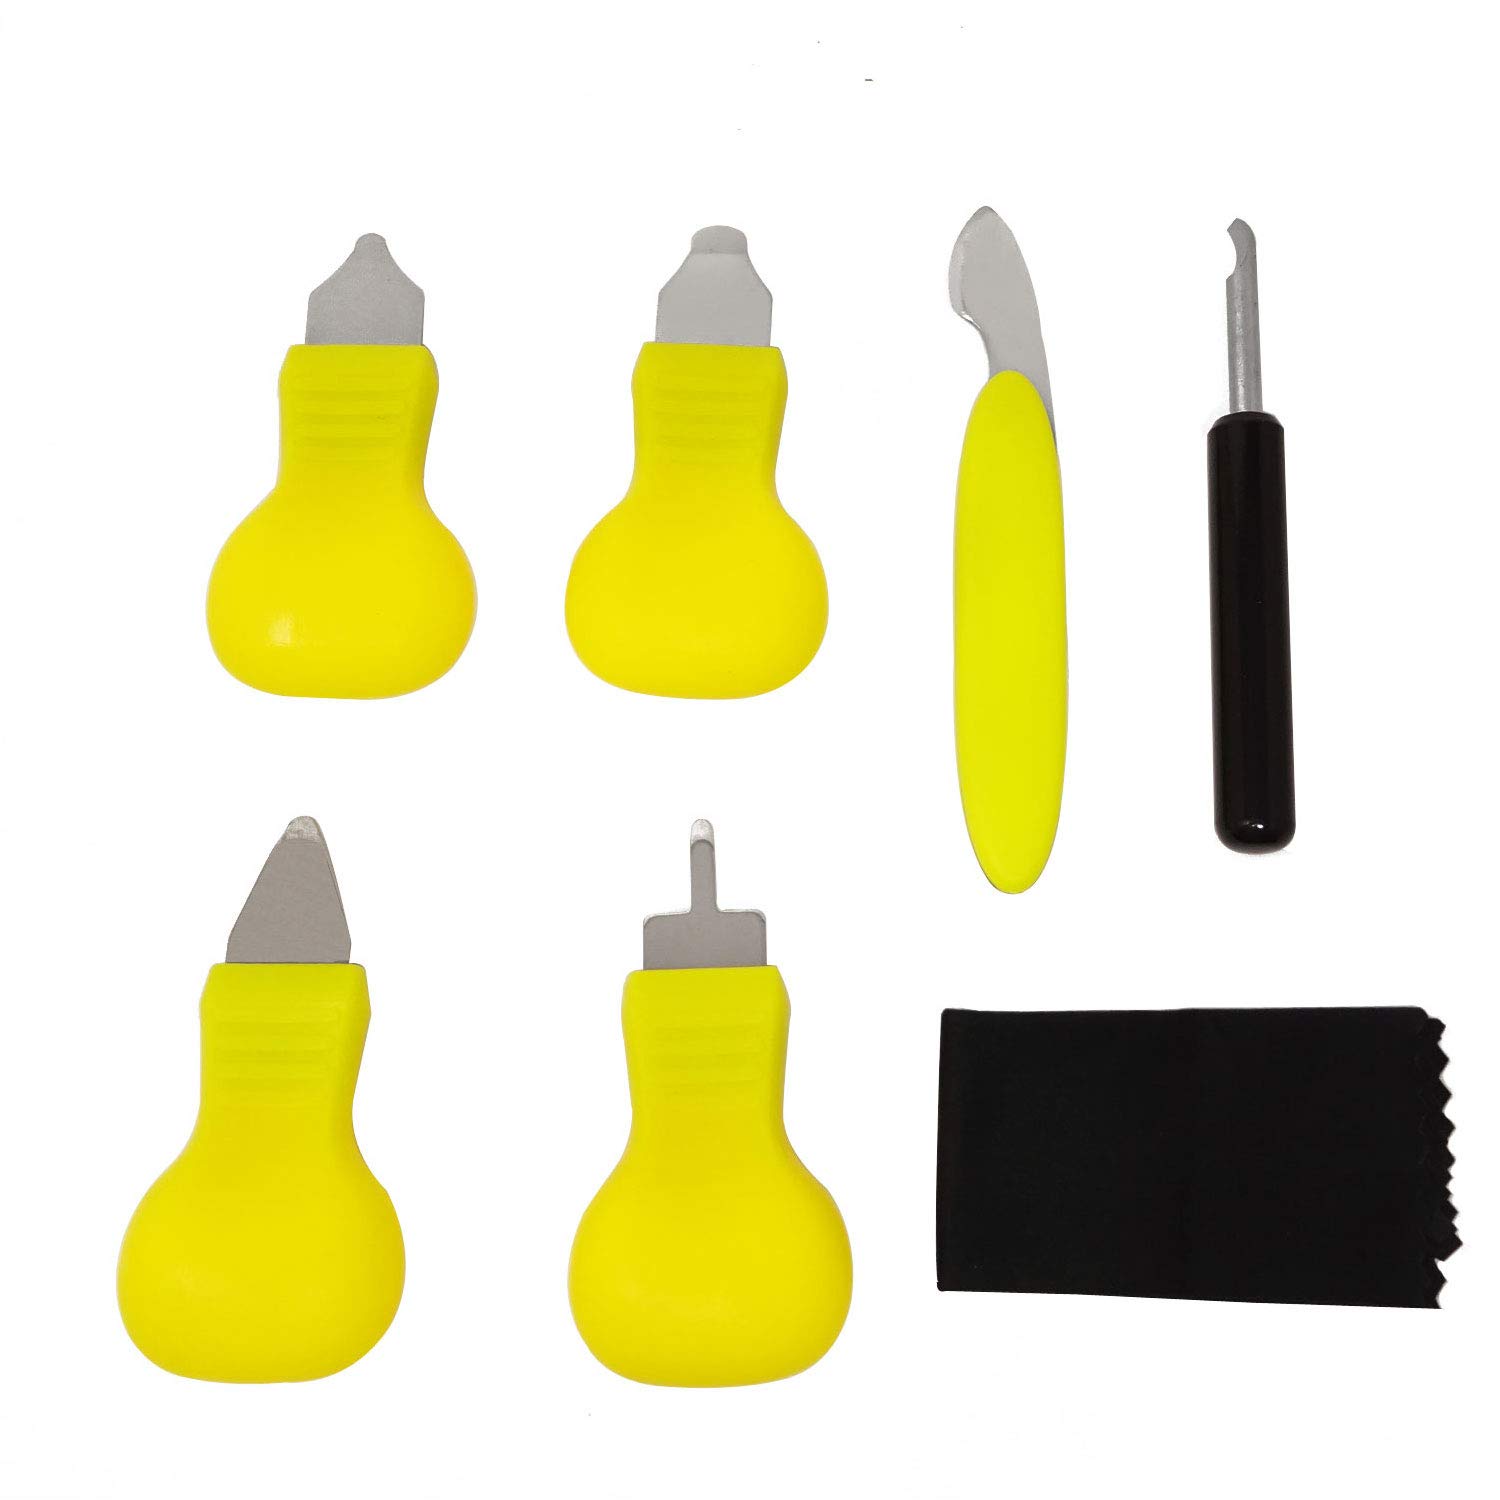 Honbay 1 Set of Watch Battery Replacement Tool Kit for Watch Repair